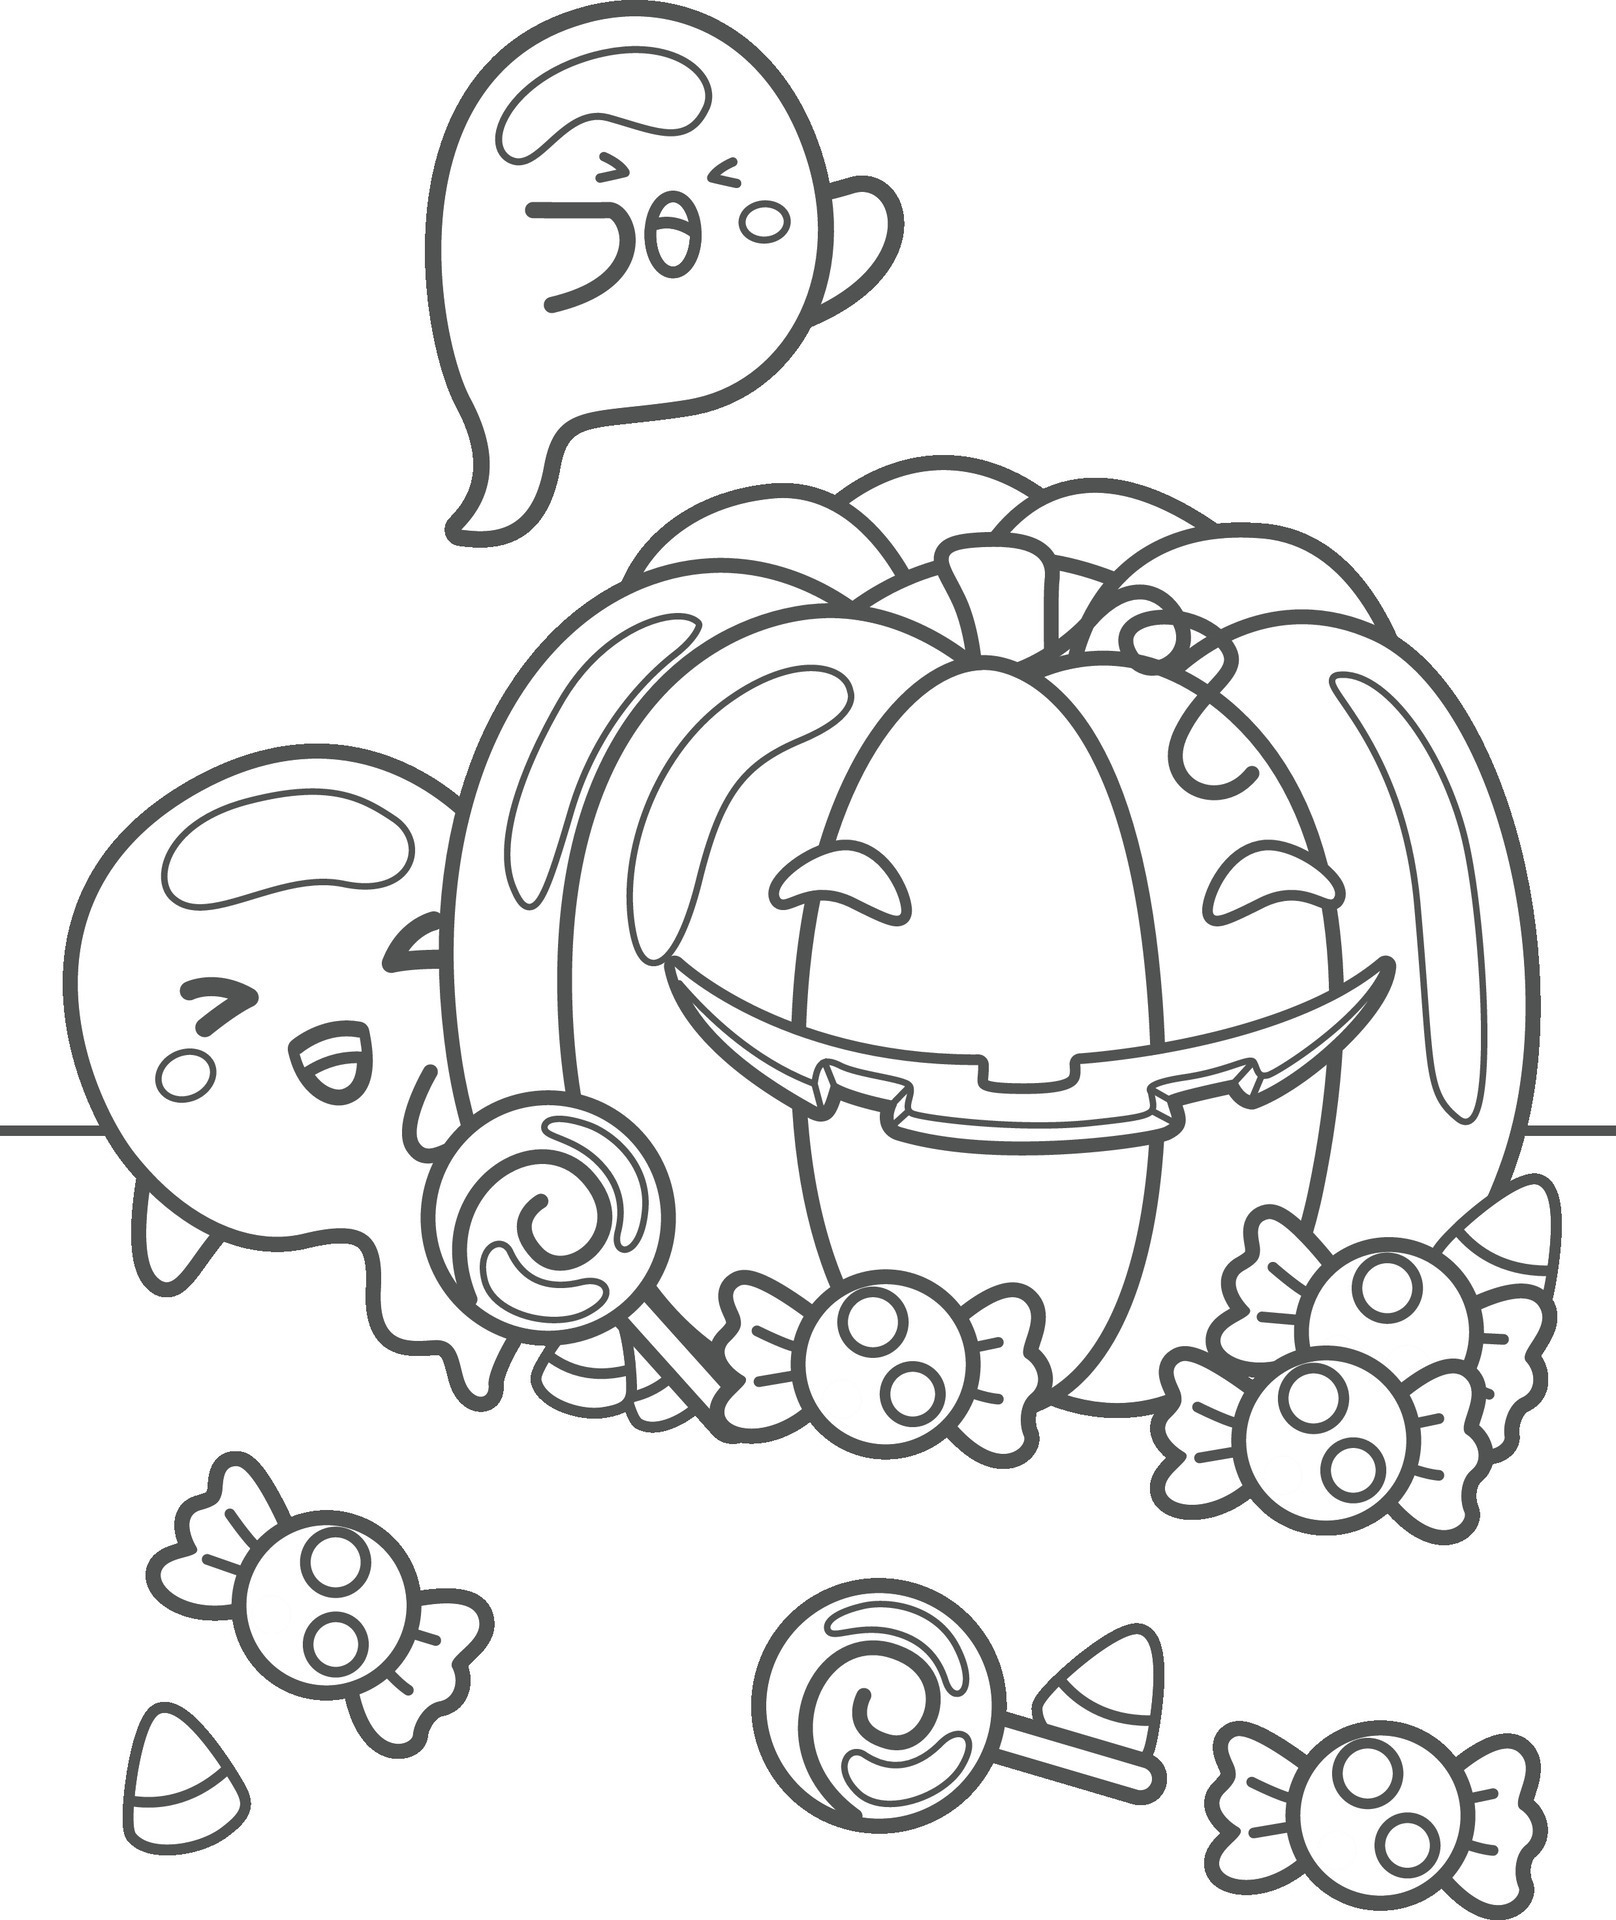 https://static.vecteezy.com/system/resources/previews/029/178/149/original/funny-ghost-halloween-and-pumpkin-cartoon-coloring-pages-for-kids-and-adult-activity-vector.jpg